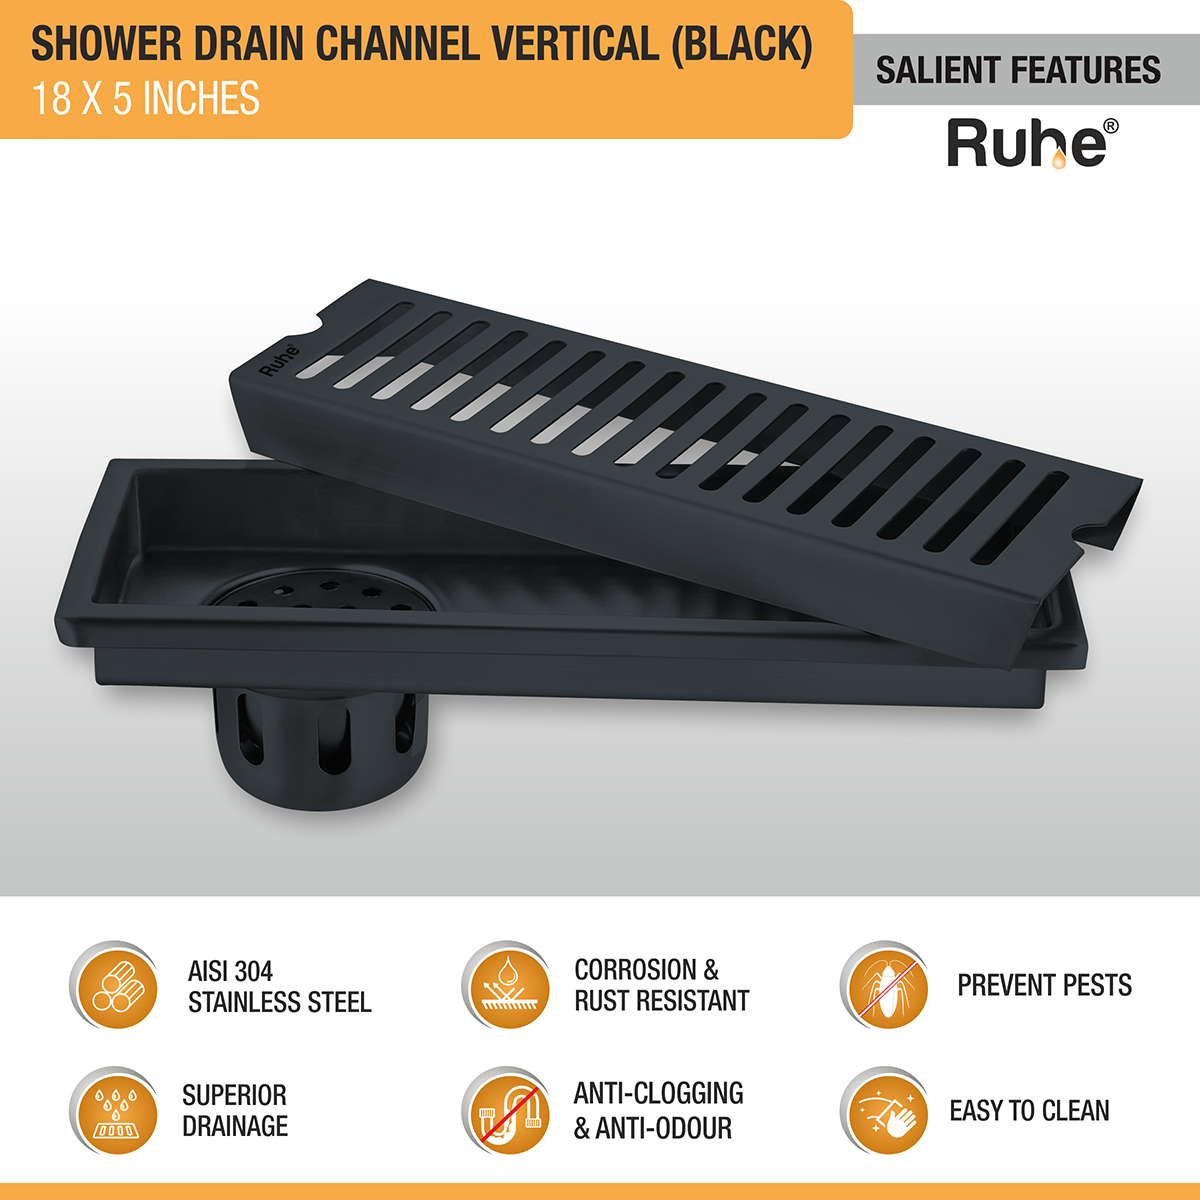 Vertical Shower Drain Channel (18 x 5 Inches) Black PVD Coated features and benefits